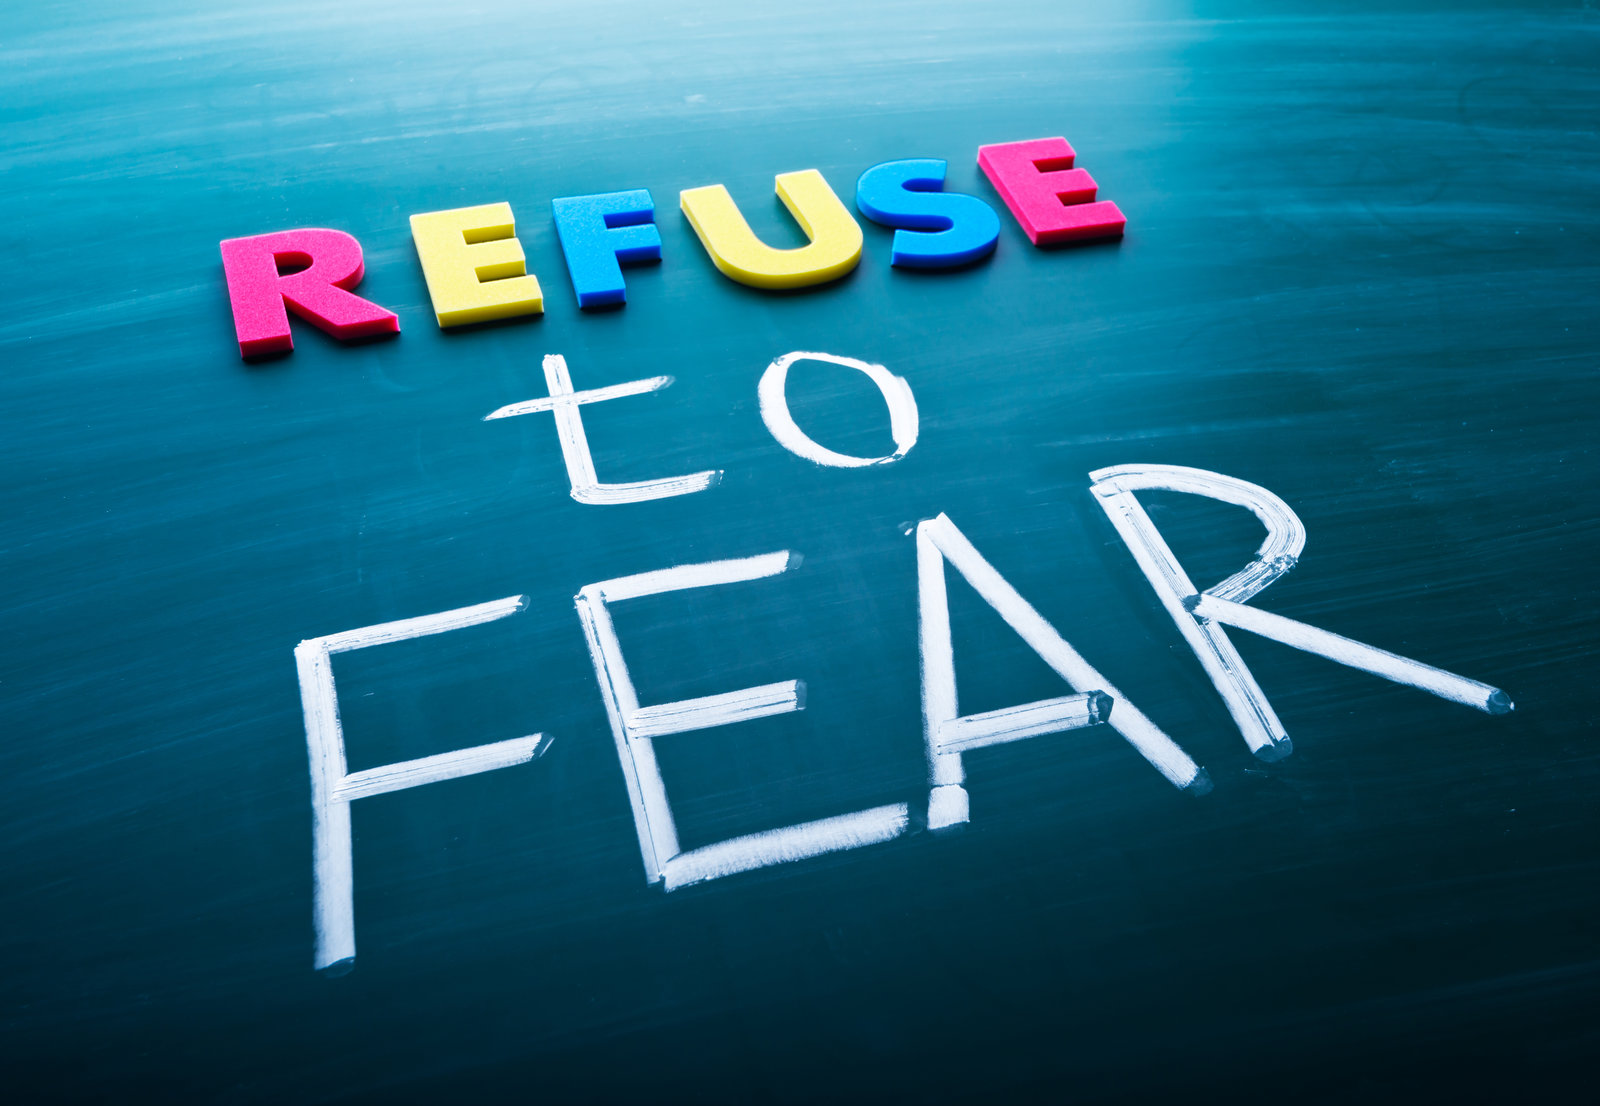 styled image of text "refuse to fear".